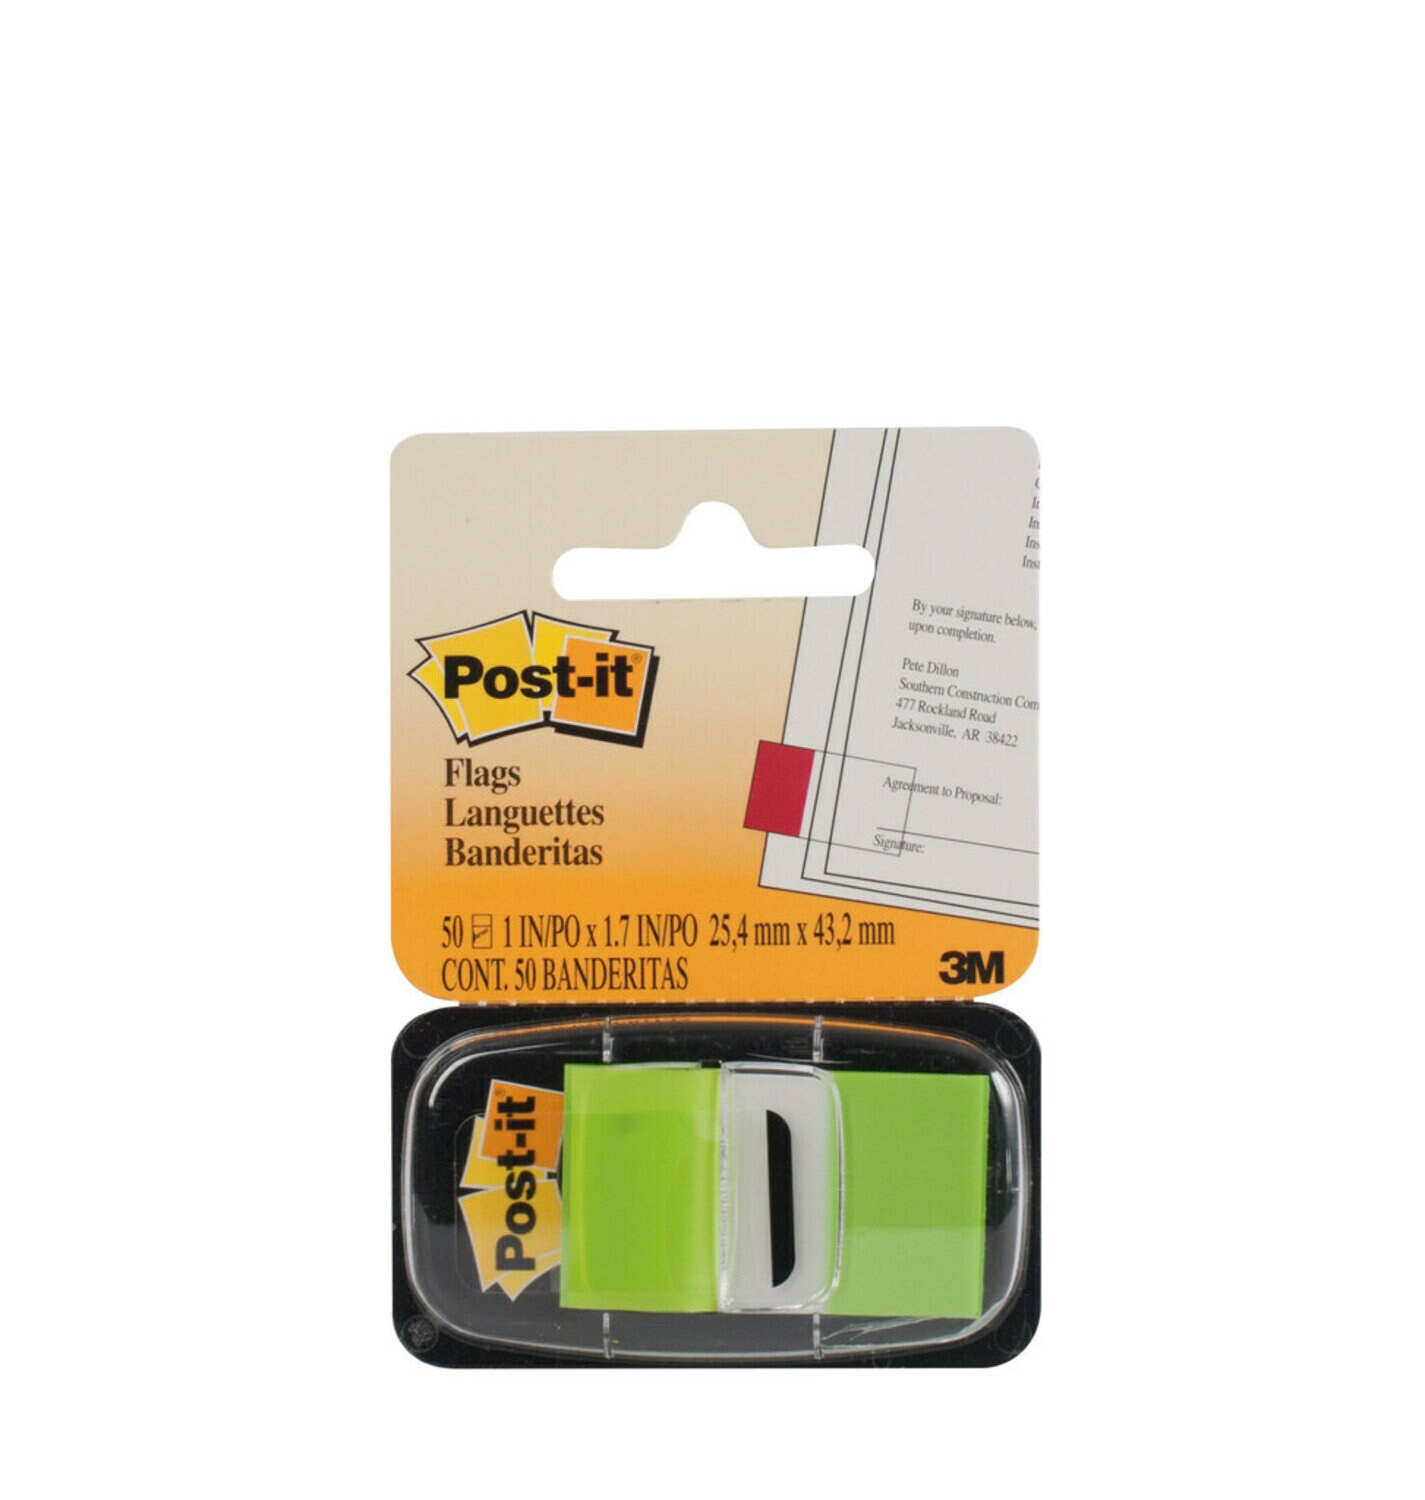 7000029846 - Post-it Flags 680-22 (36) 1 in. x 1.7 in. (25,4 mm x 43,2 mm) Bright
Green